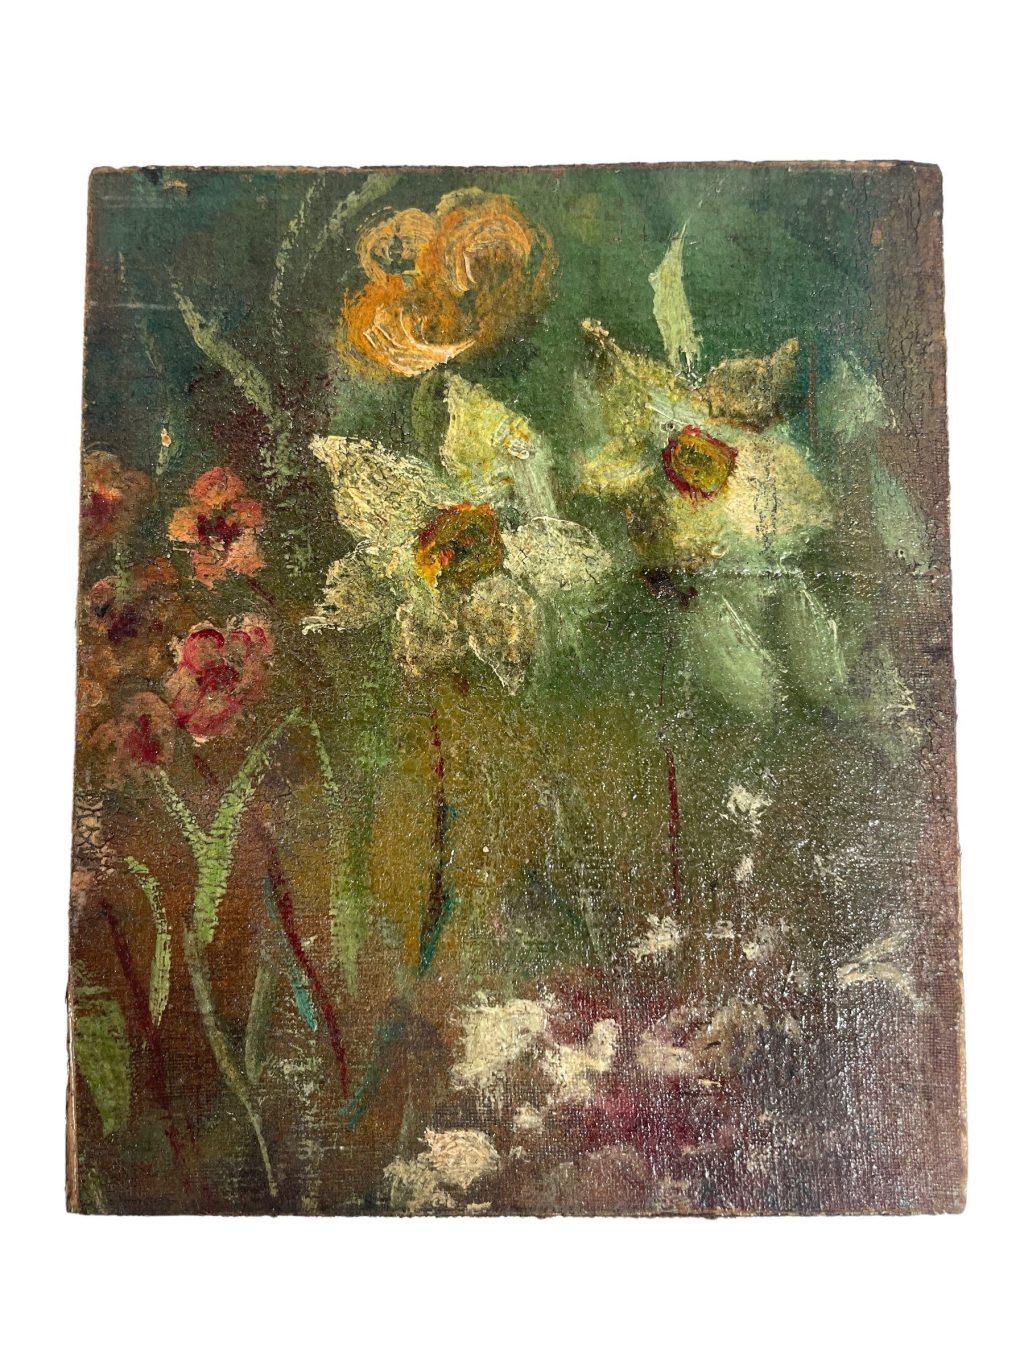 Antique French Small Tiny Wild Flowers “Wild Old Spring” Oil Painting On Wood Board Wall Decor Decoration c1900’s